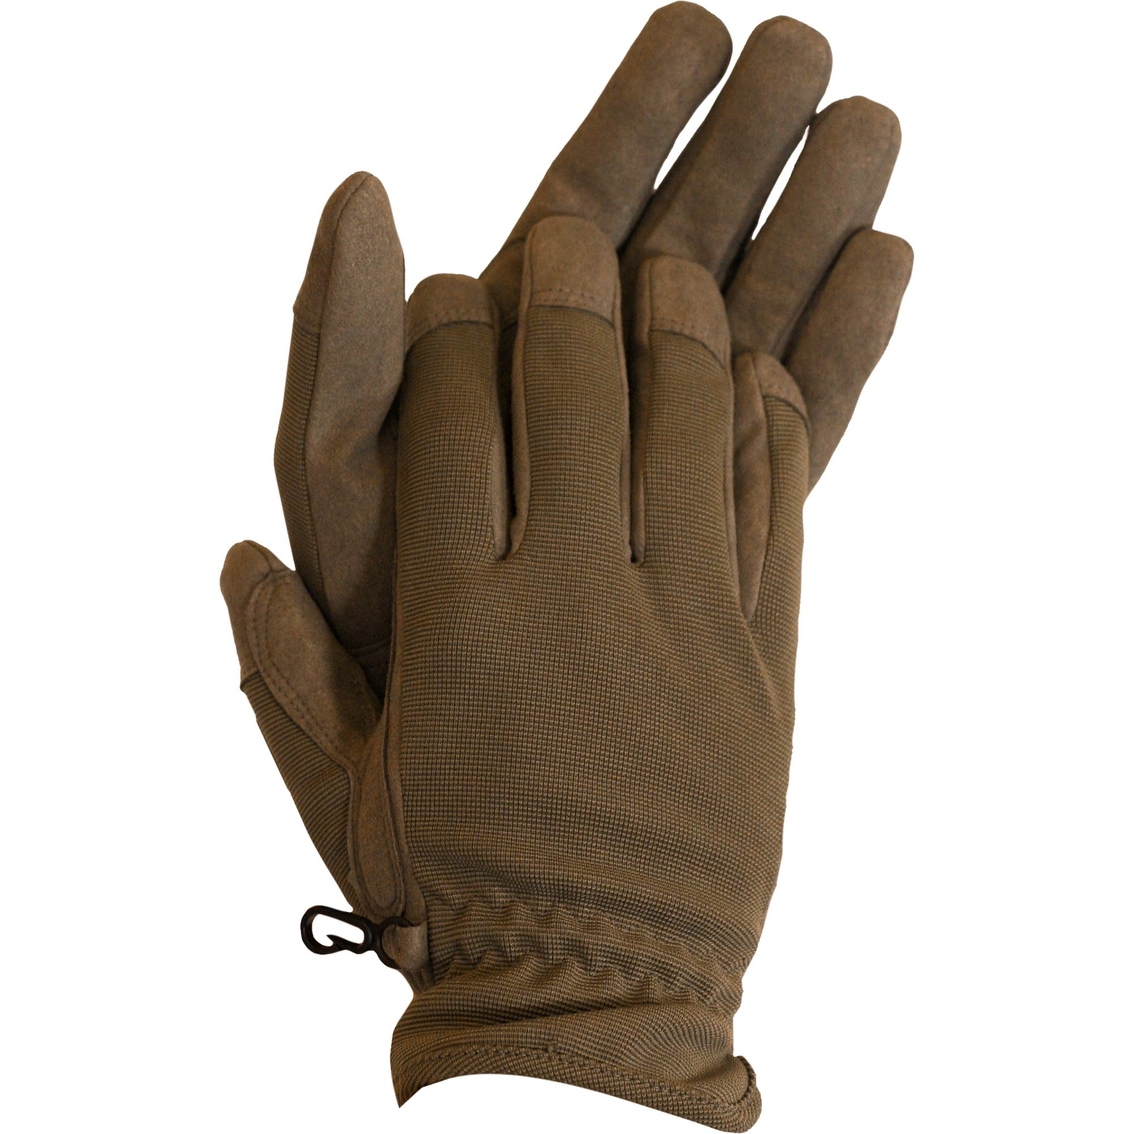 Whitewater Stretch Shooting Glove, Gloves